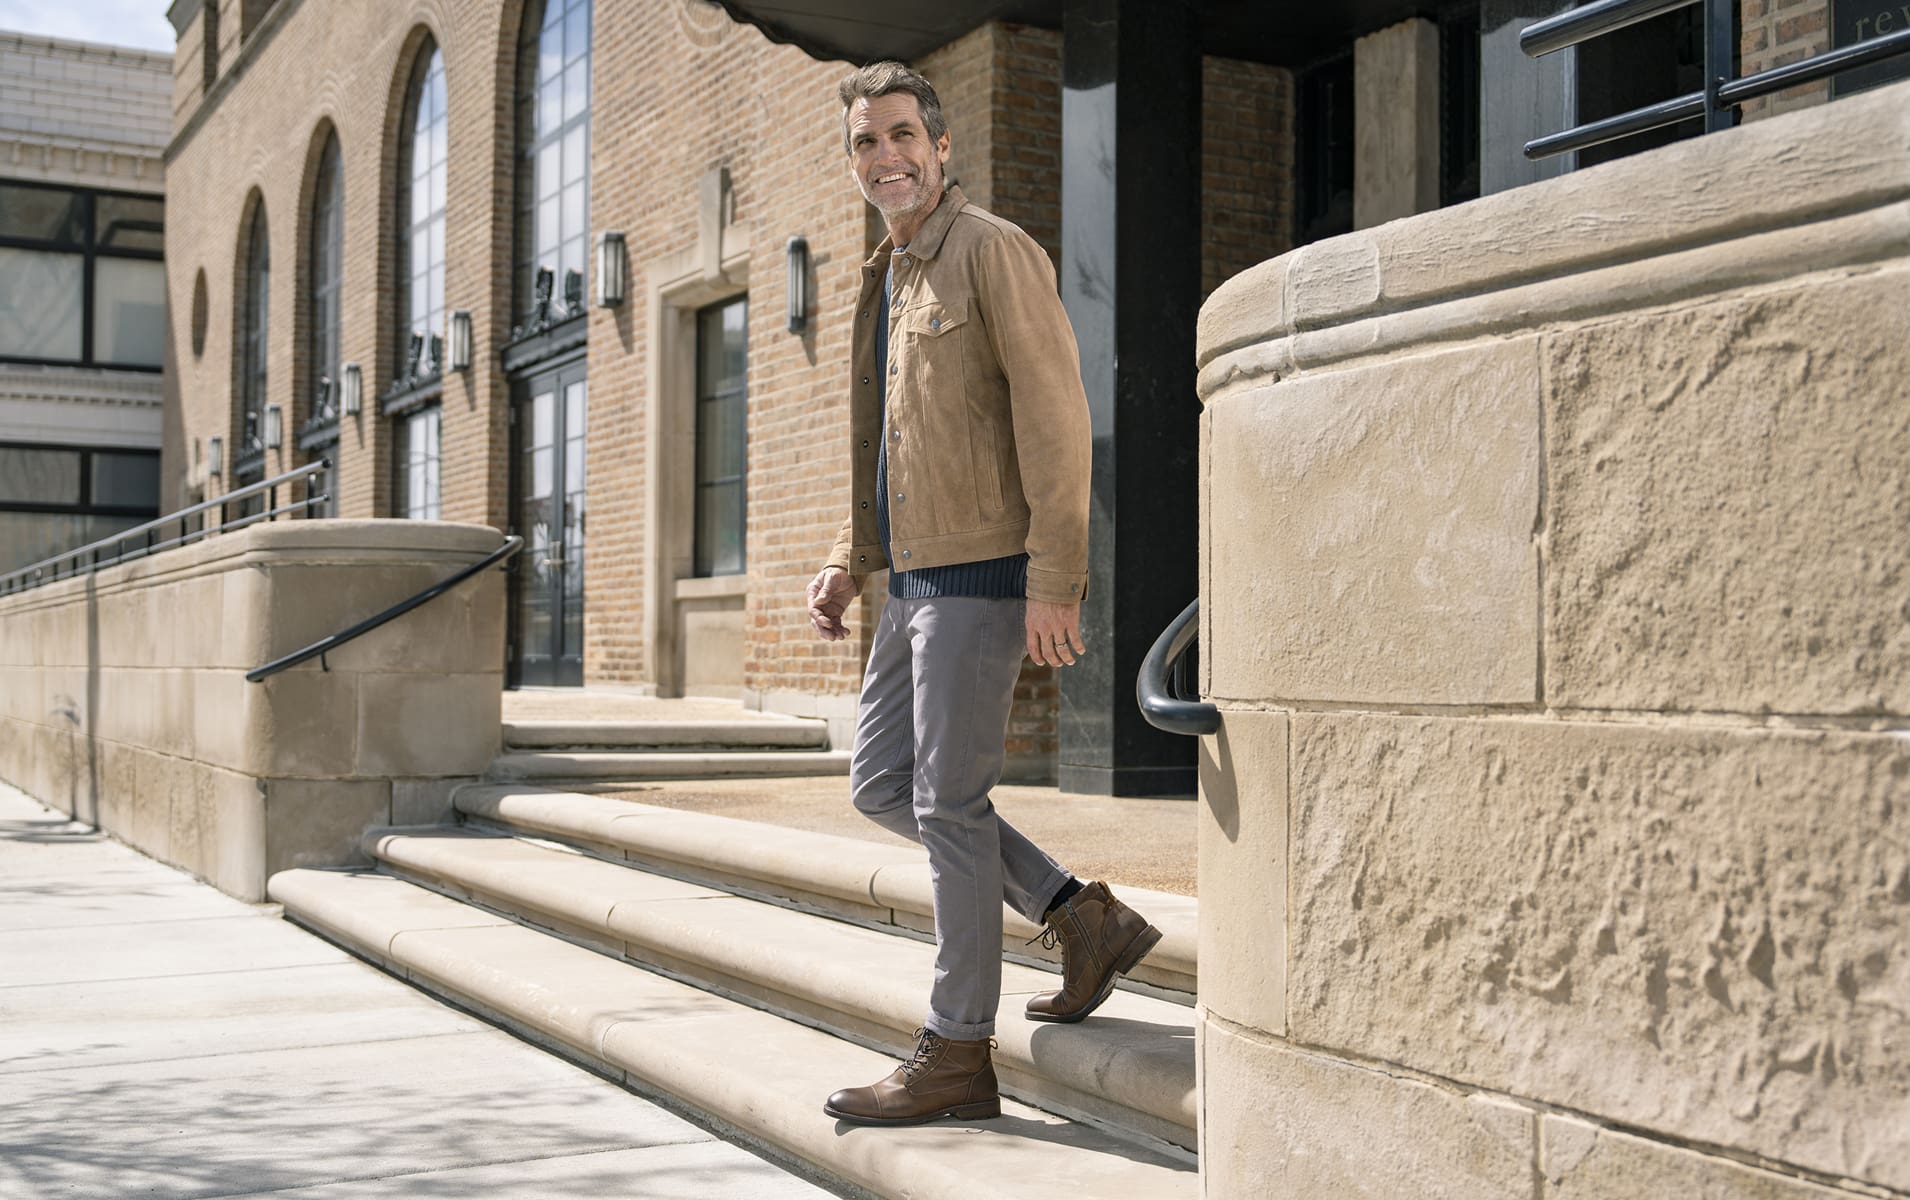 Click to shop Florsheim casuals. Image features the Lodge boot in brown.